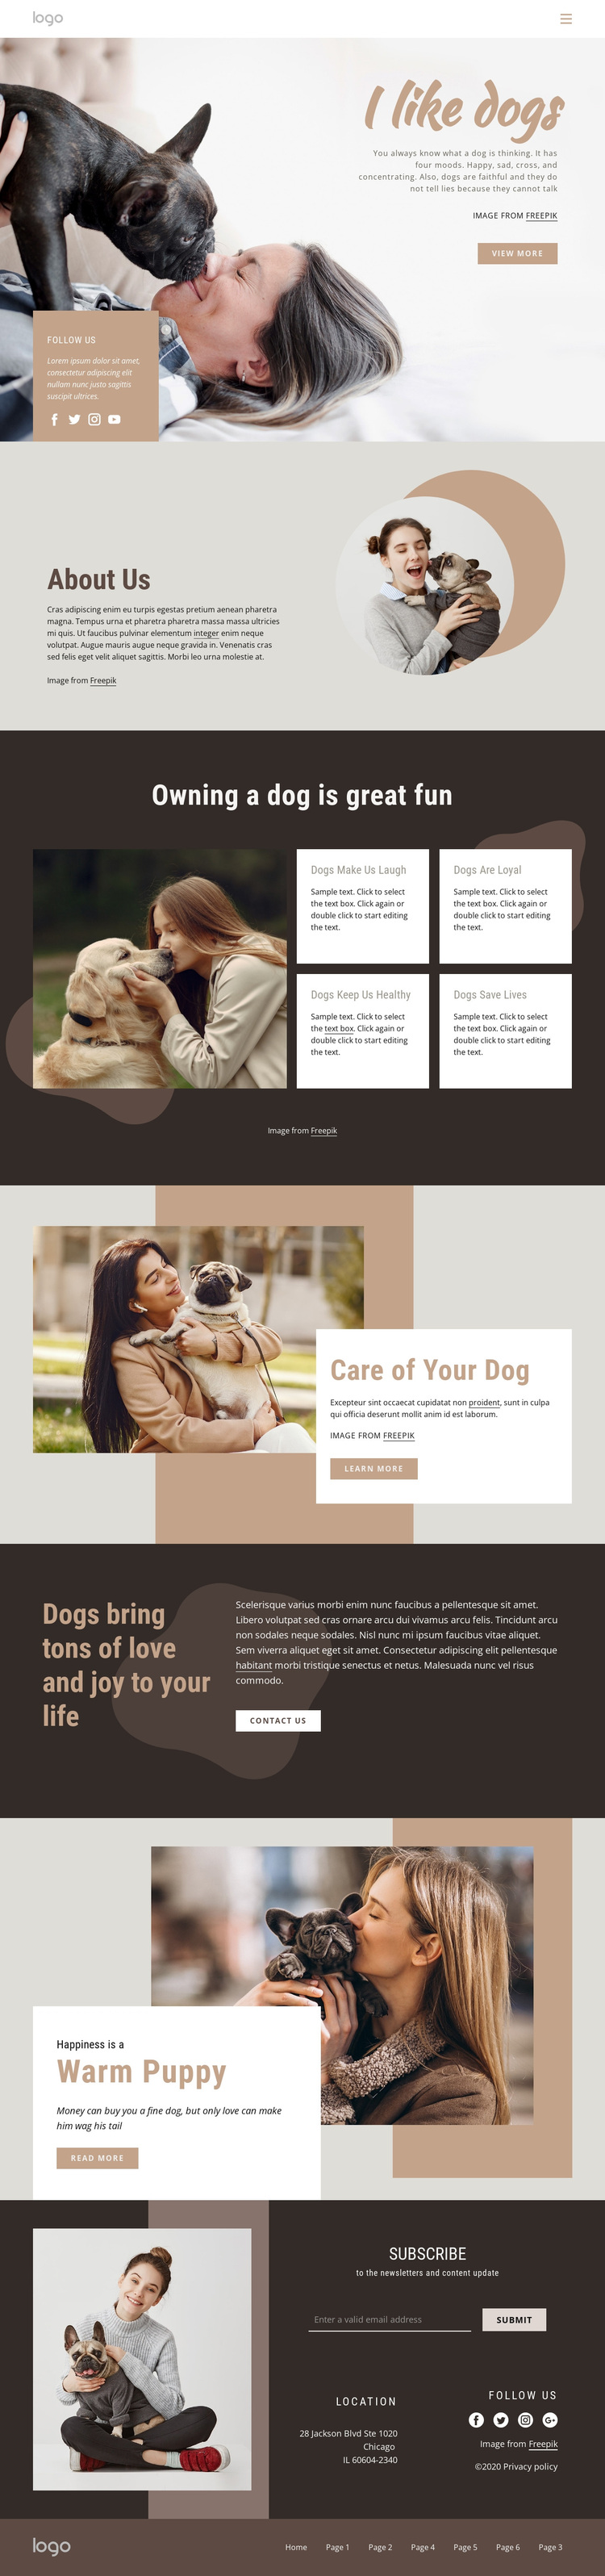 All about dogs Joomla Page Builder